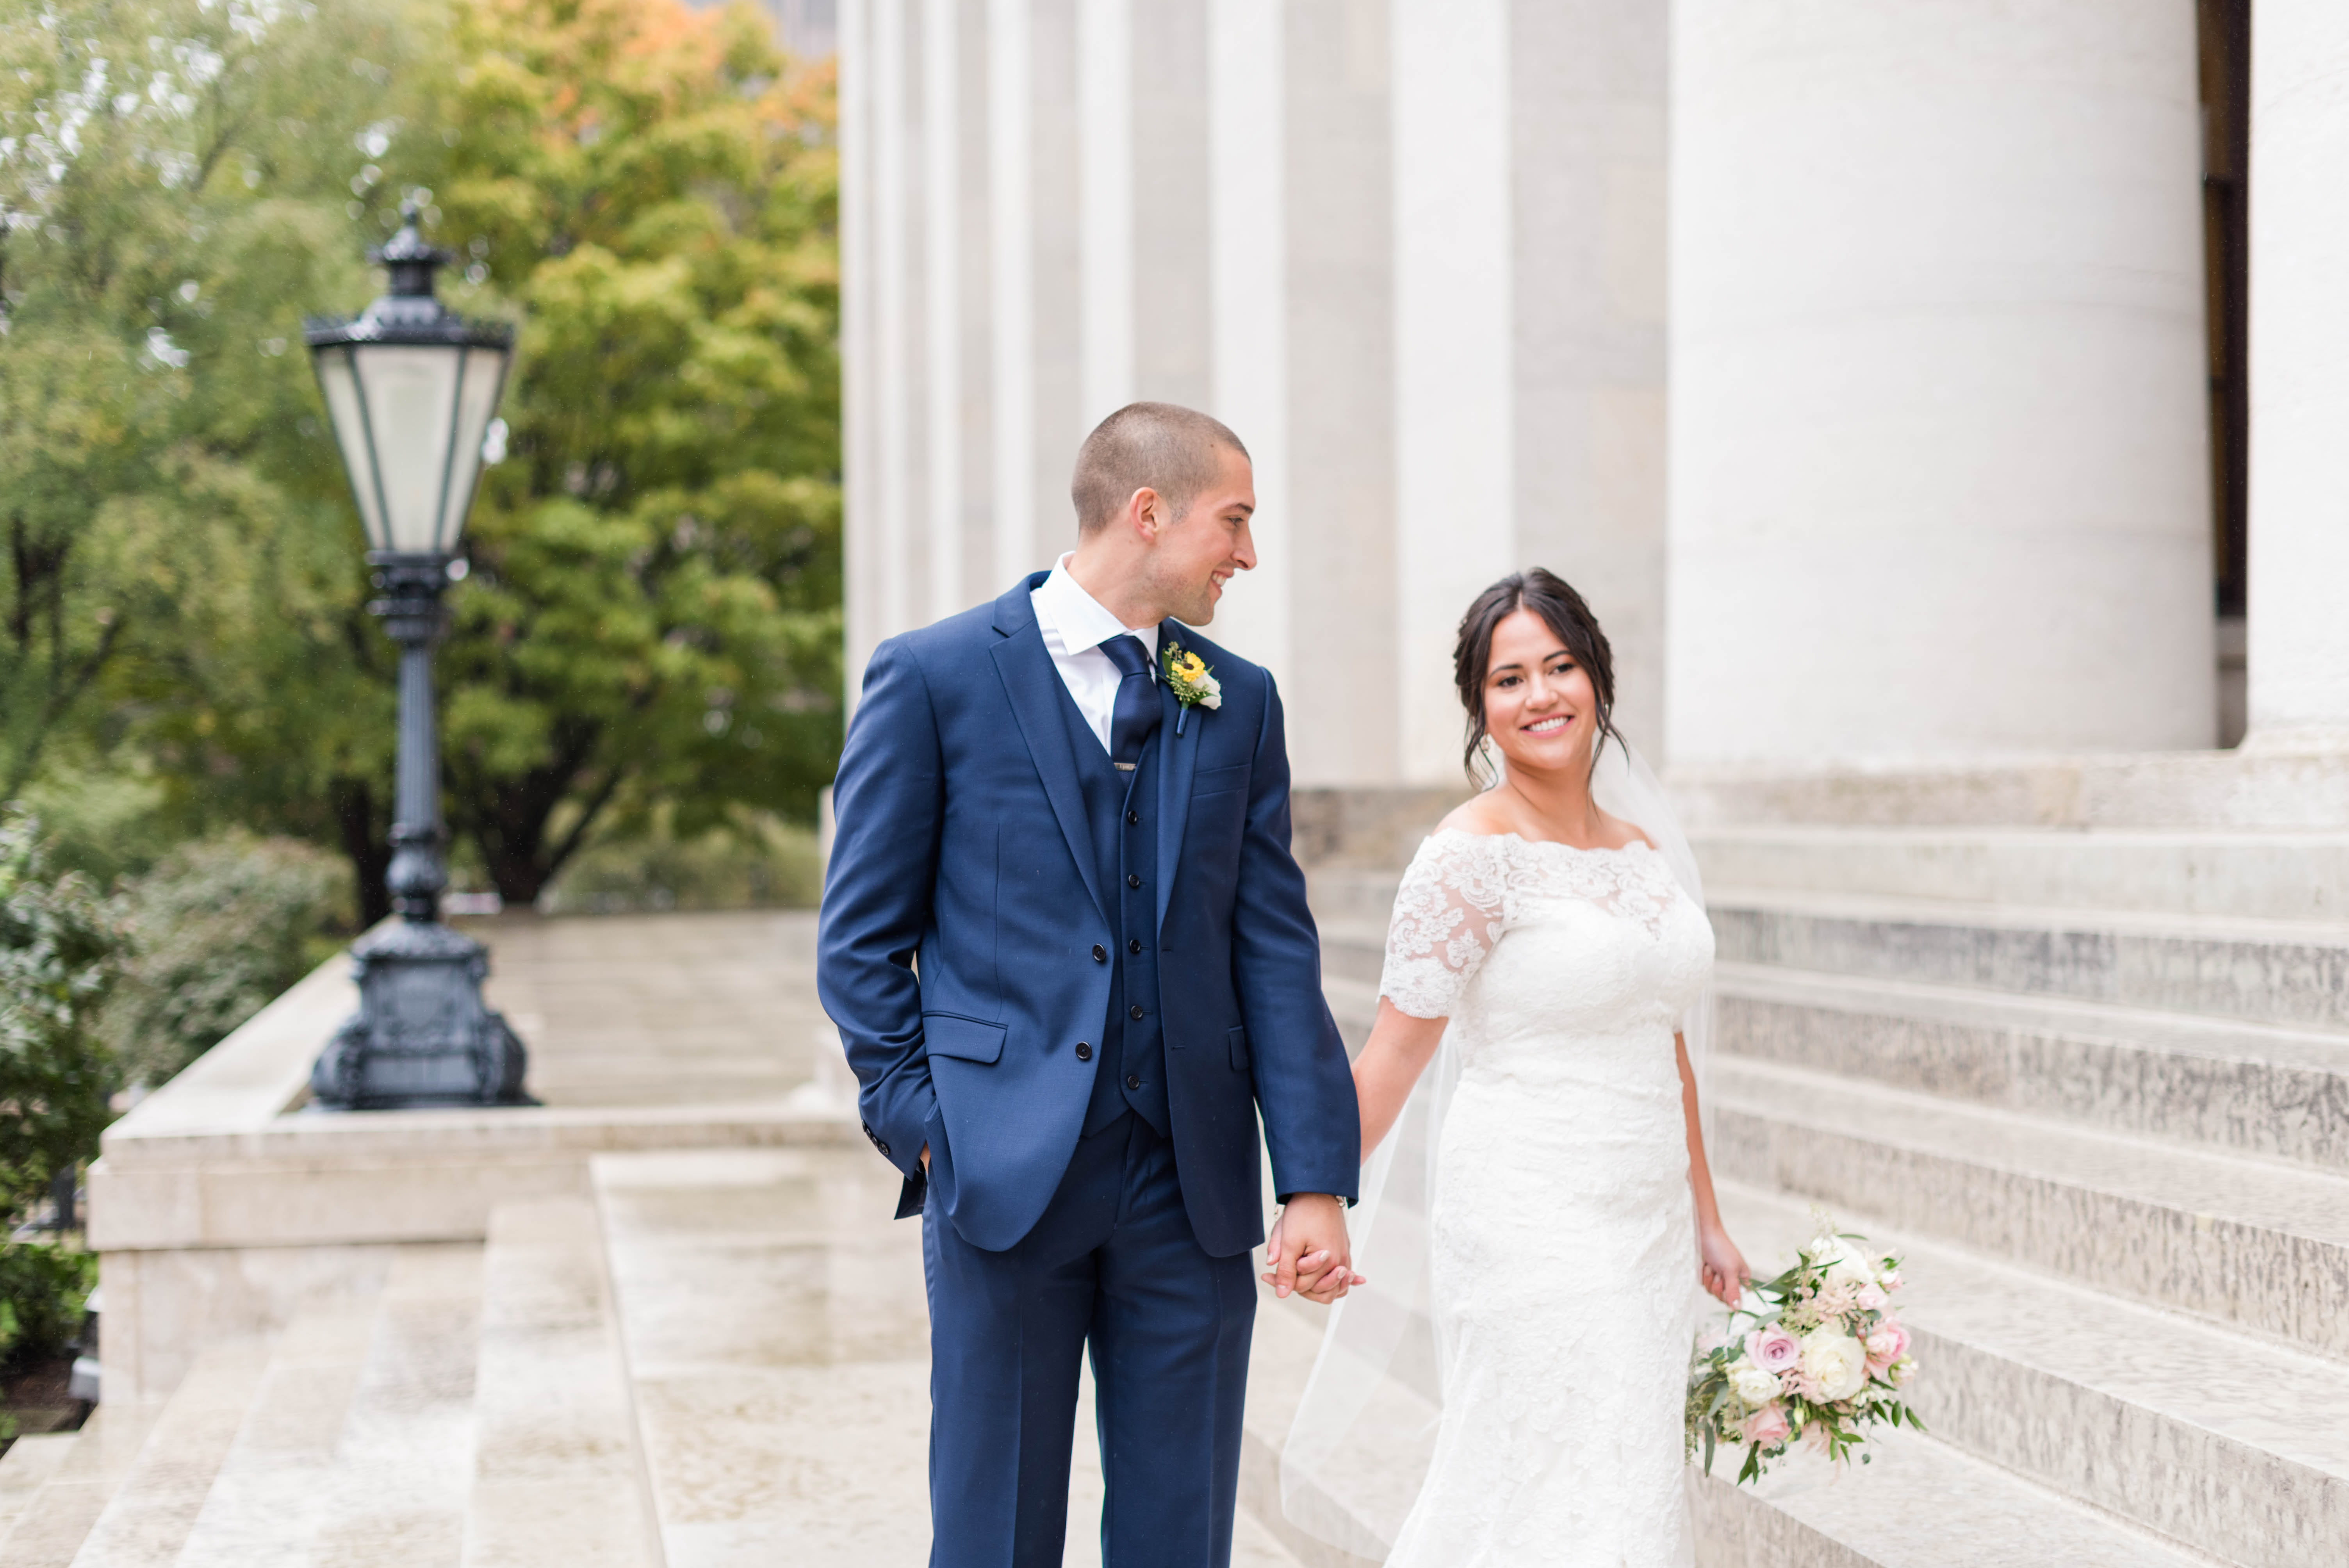 Olivia and Corbin: Fall Wedding At The Statehouse